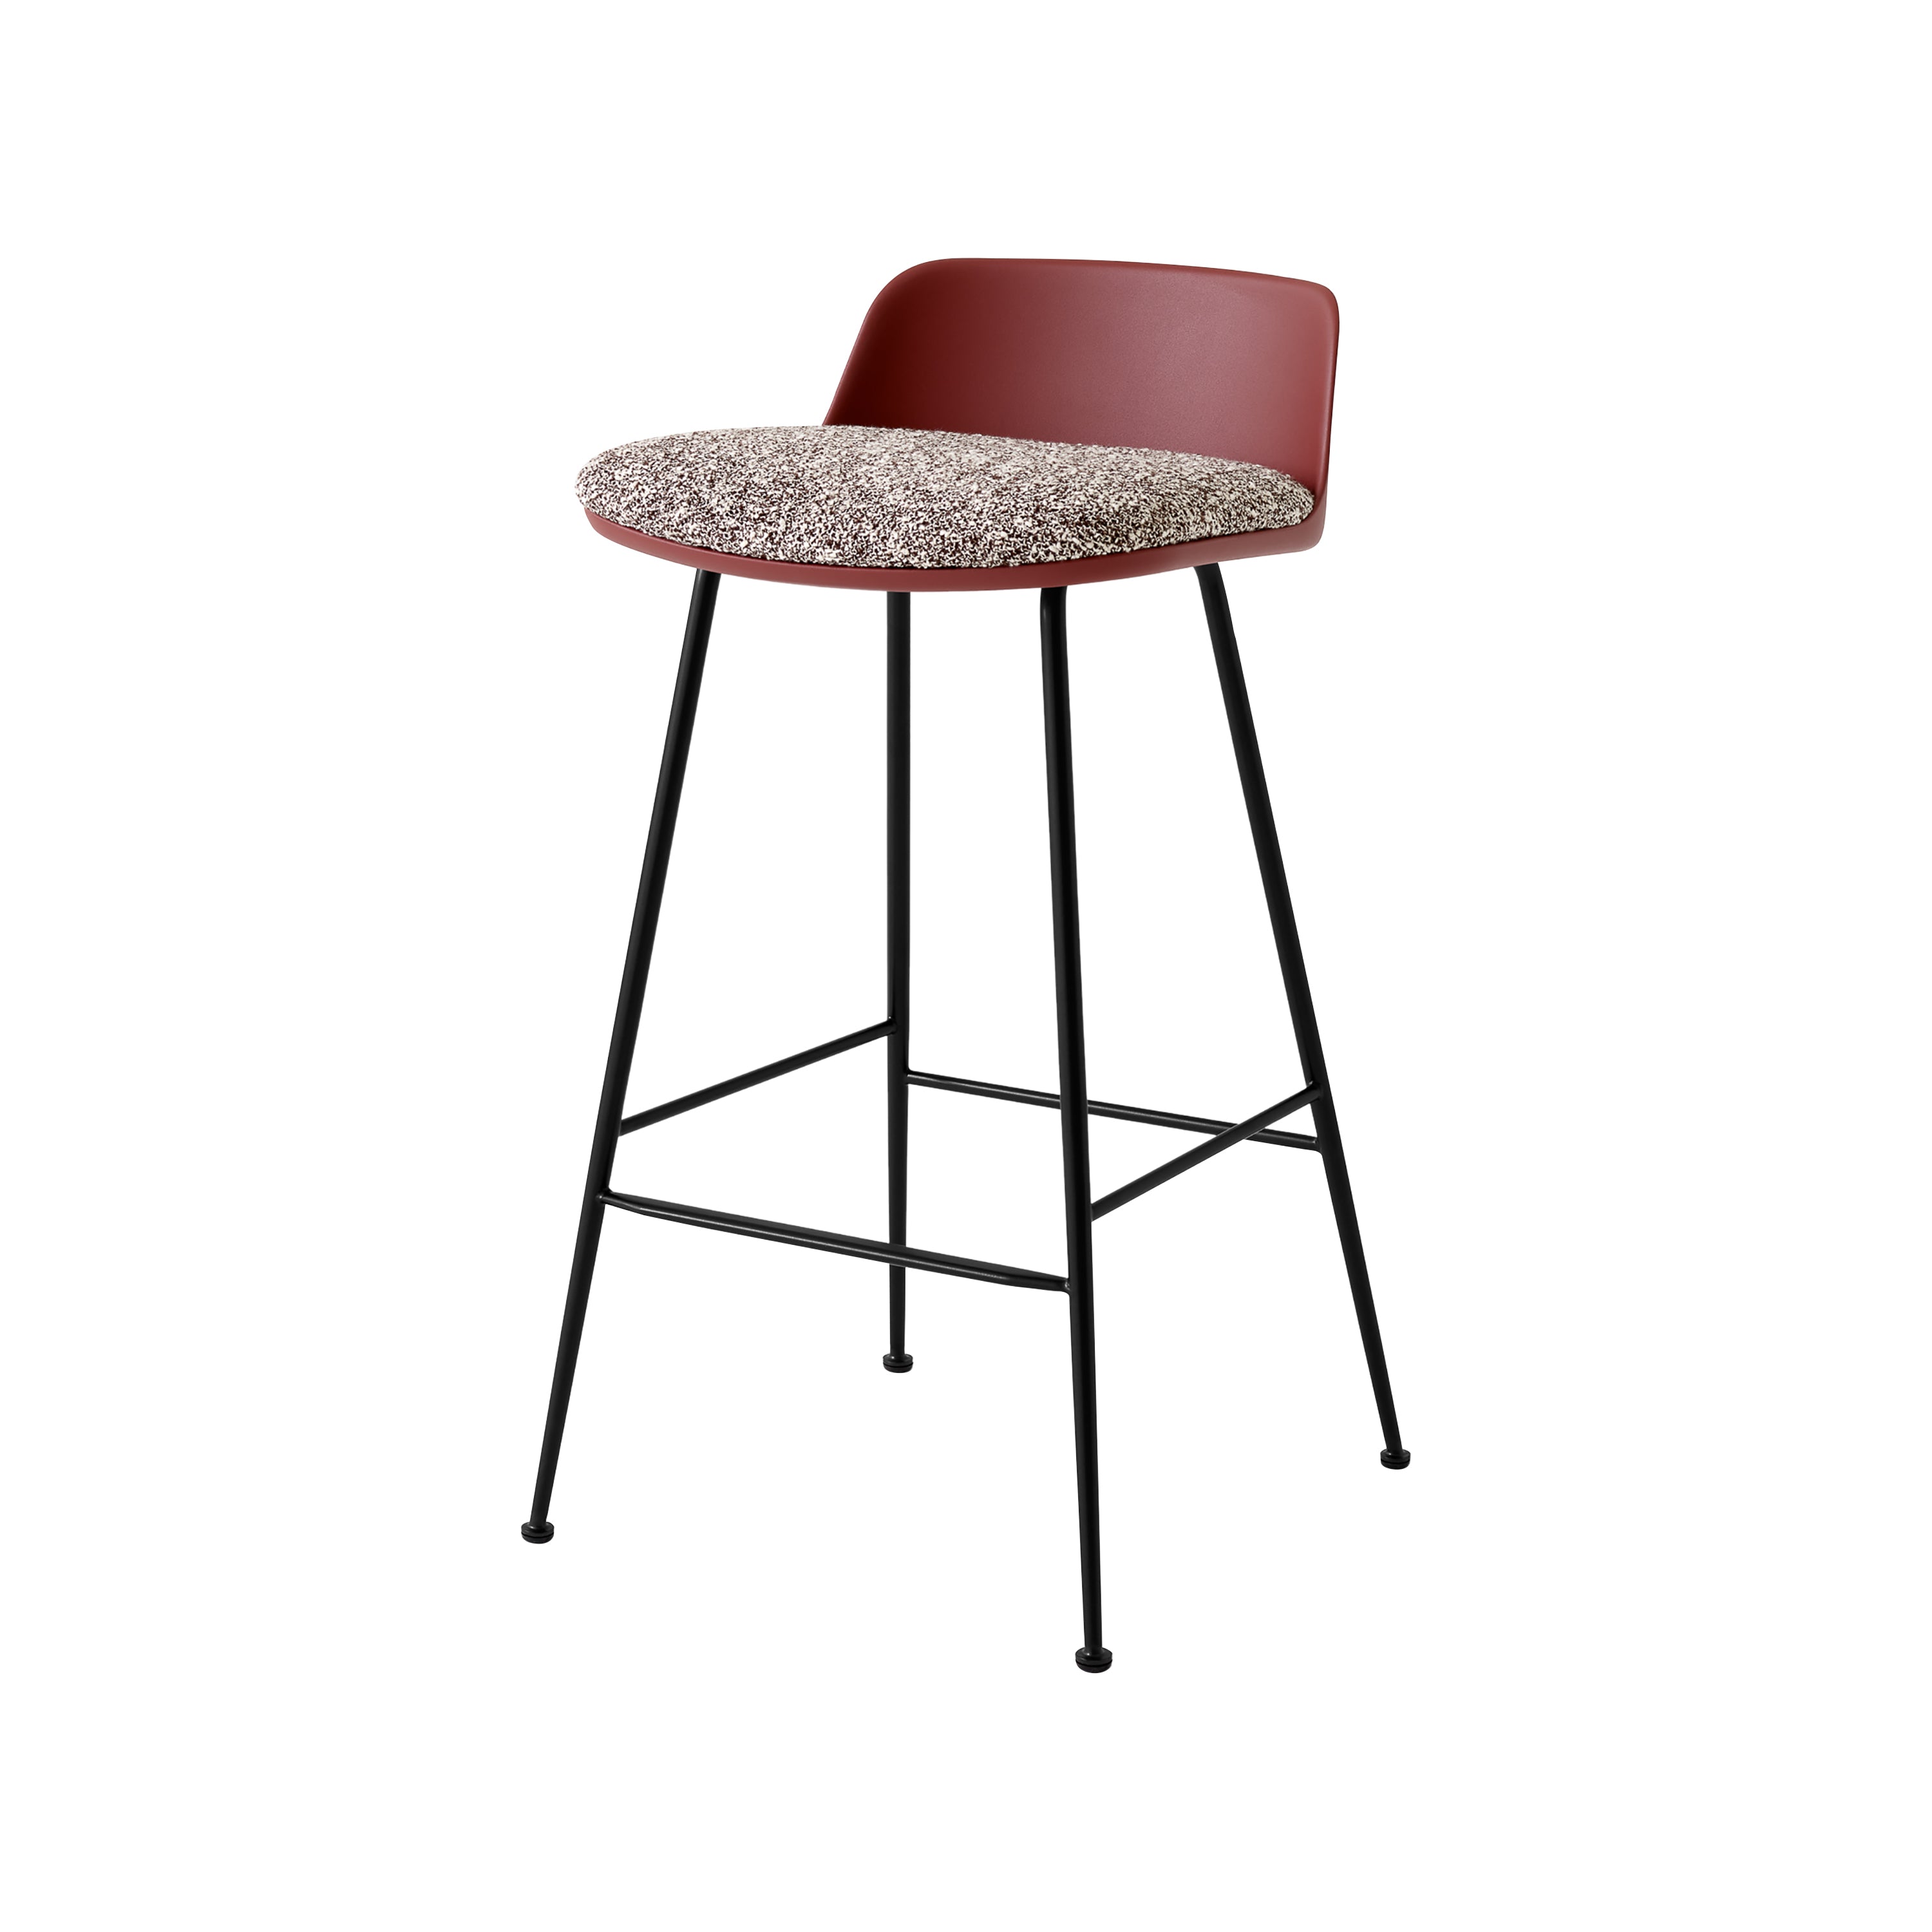 Rely Counter Stool: HW82 + Red Brown + Black